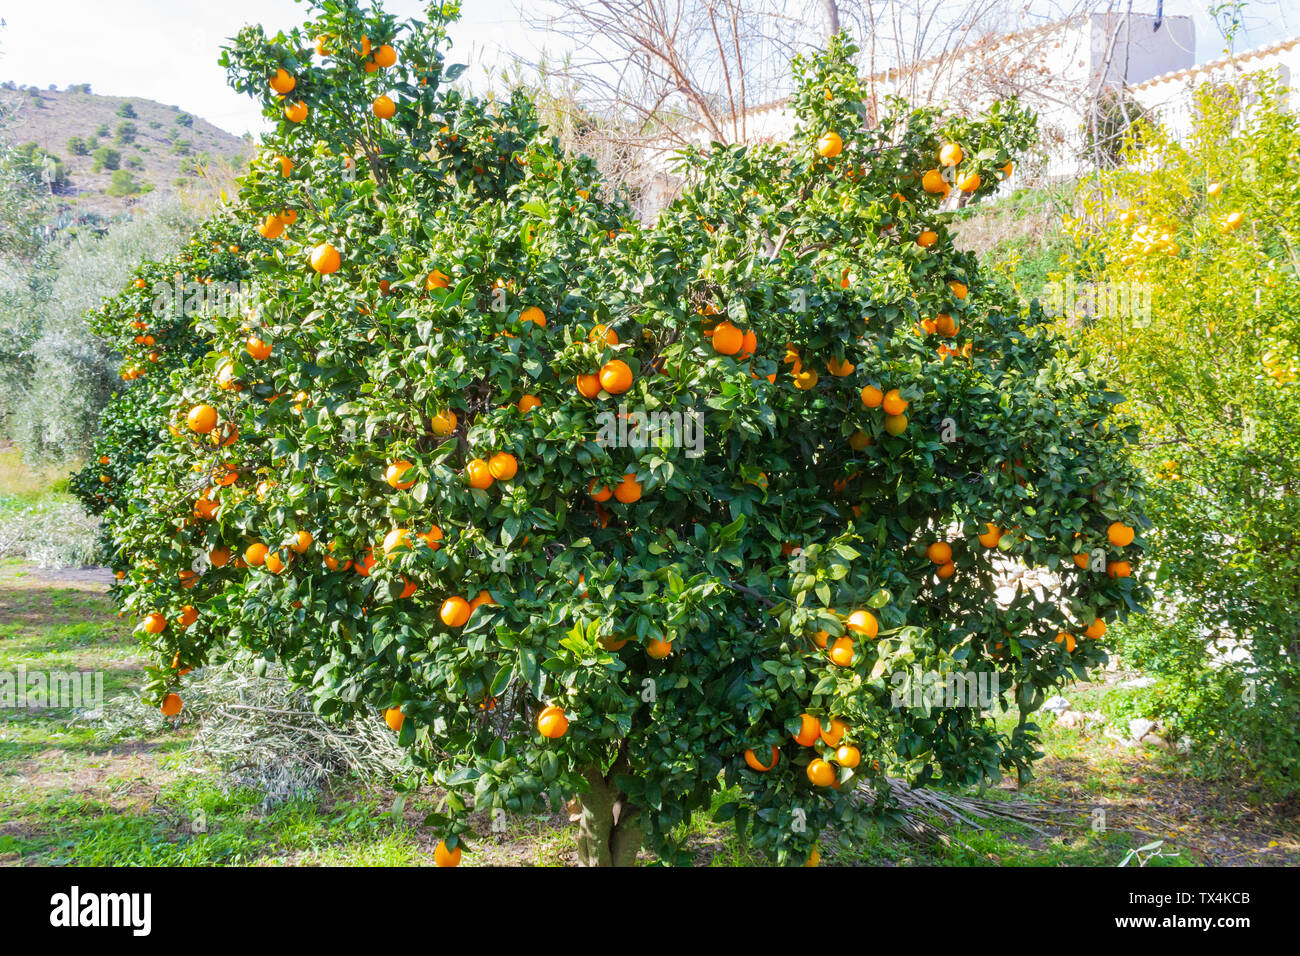 Citrus × sinensis, Orange Tree laden with Fruit, ready to be picked Stock Photo